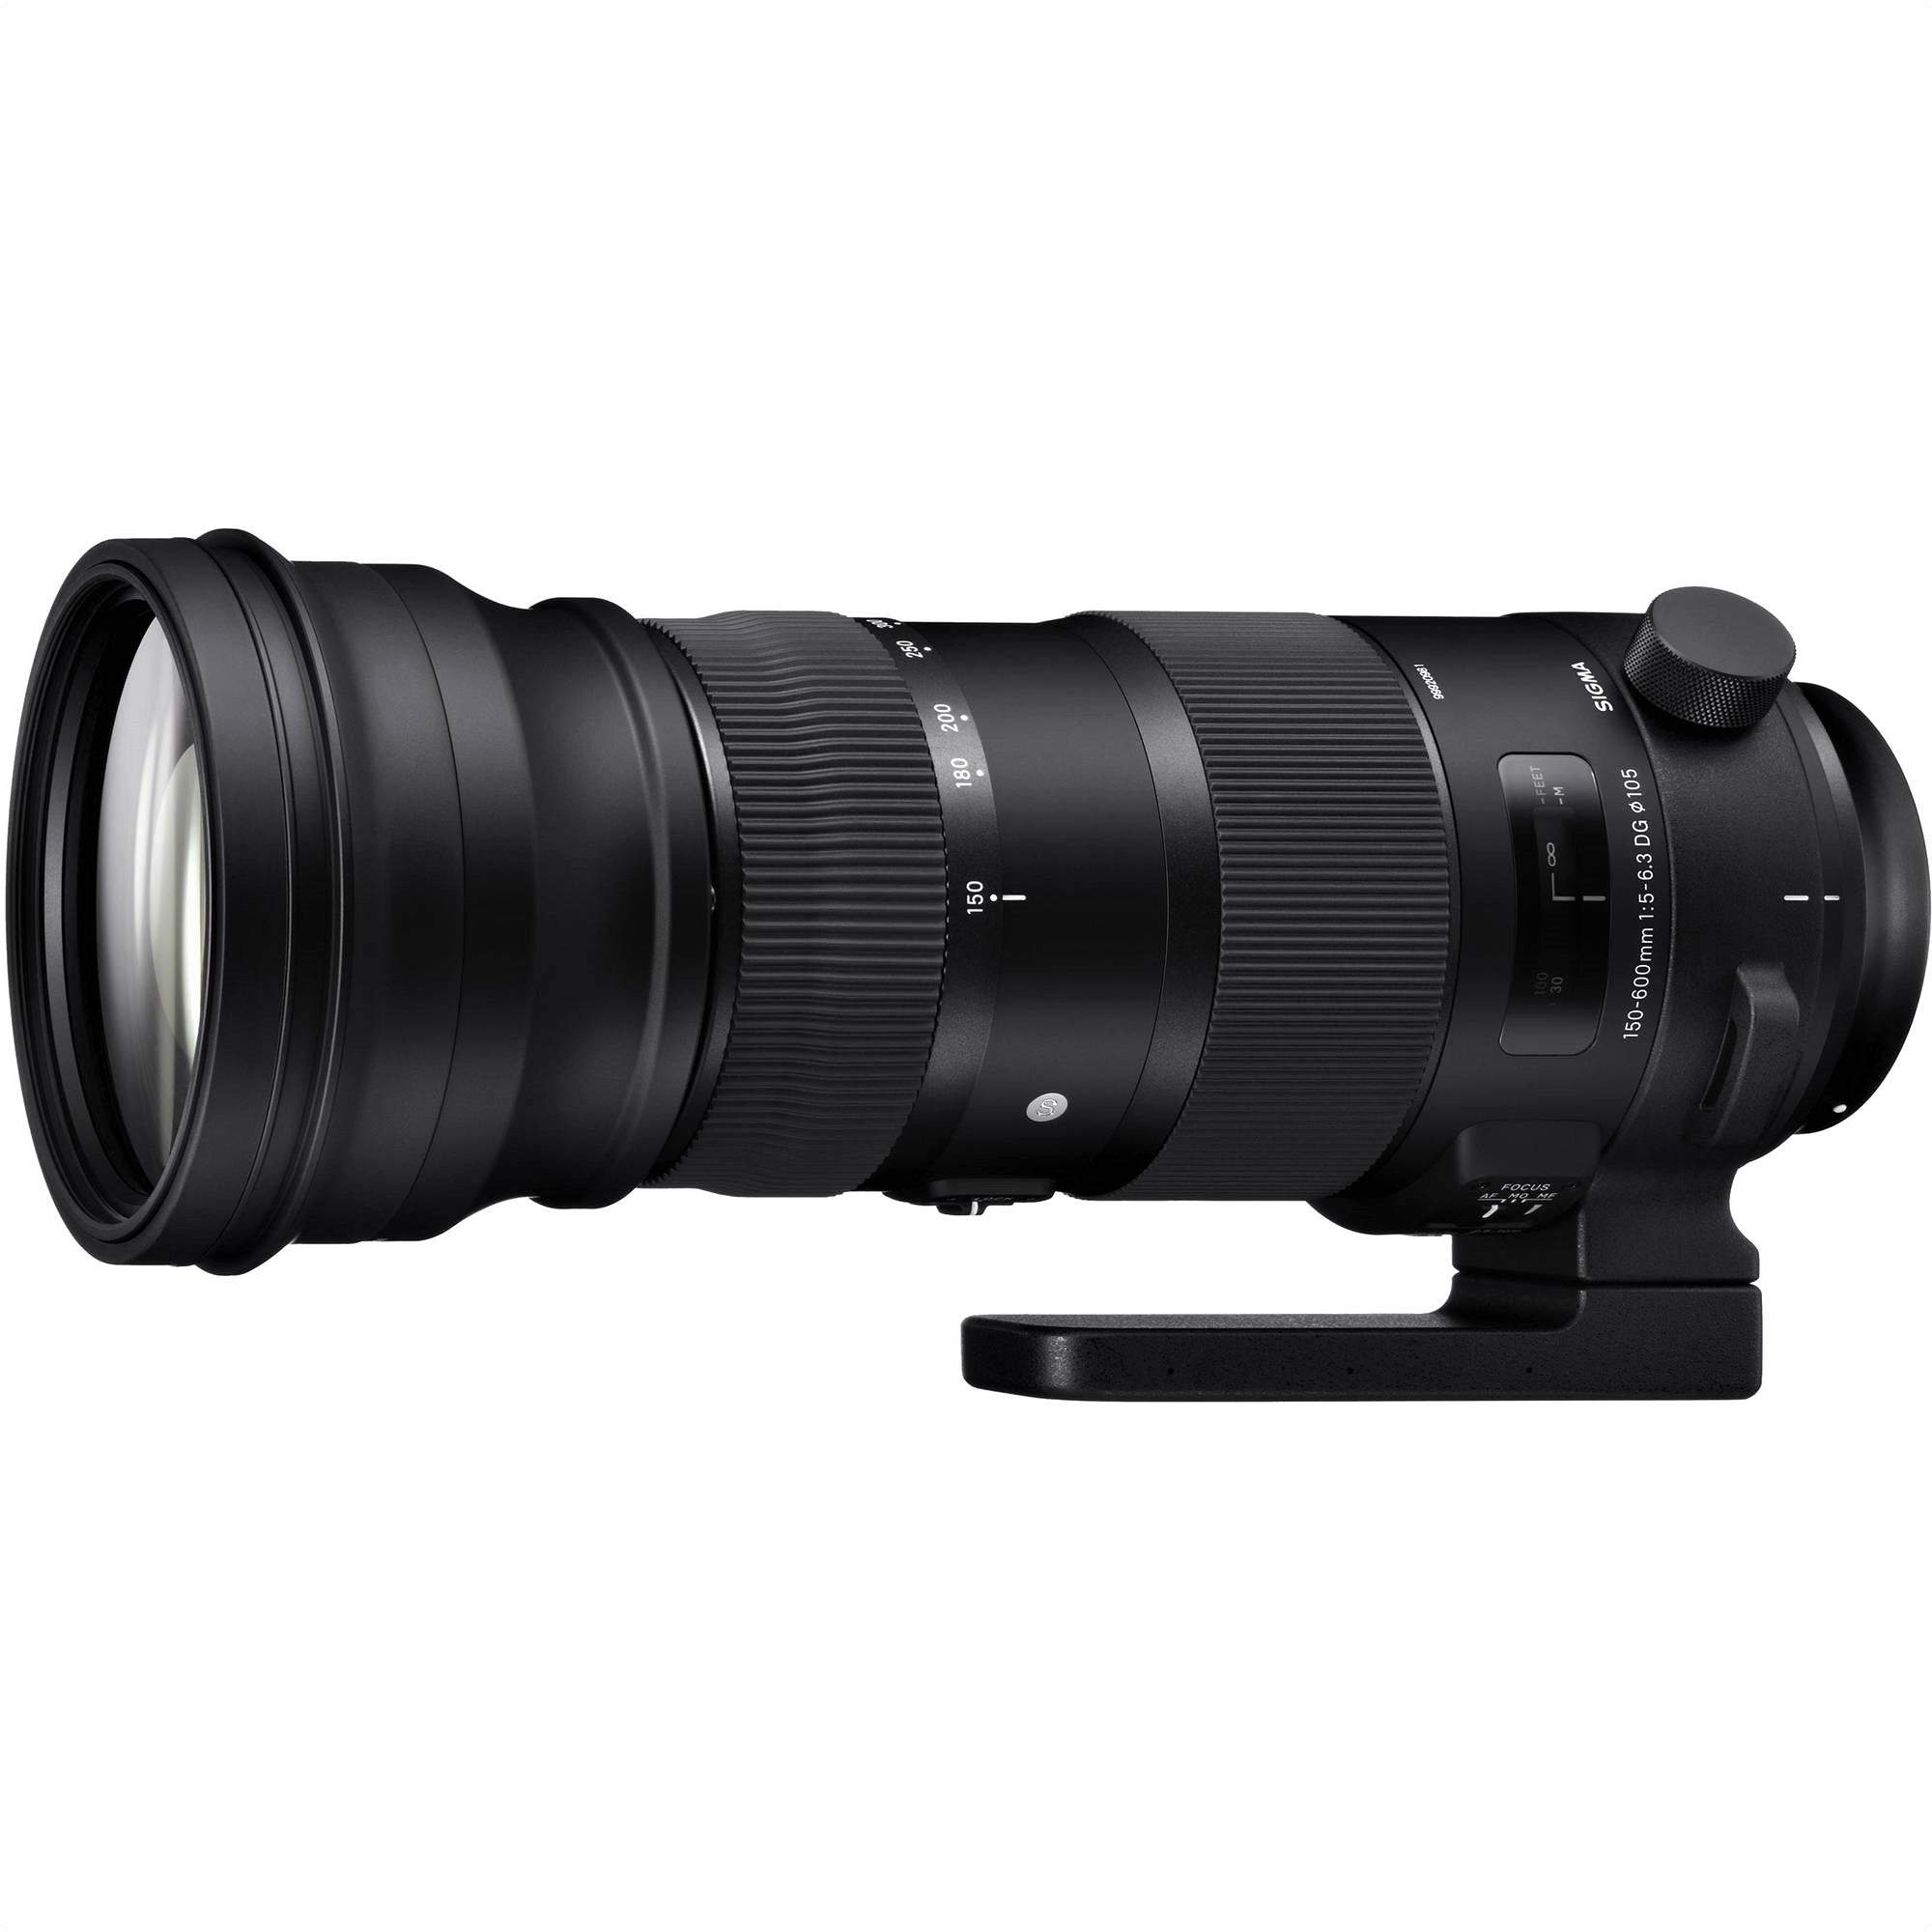 Sigma 150-600mm F5-6.3 DG OS HSM Sports Lens for Sigma SA in a Side View